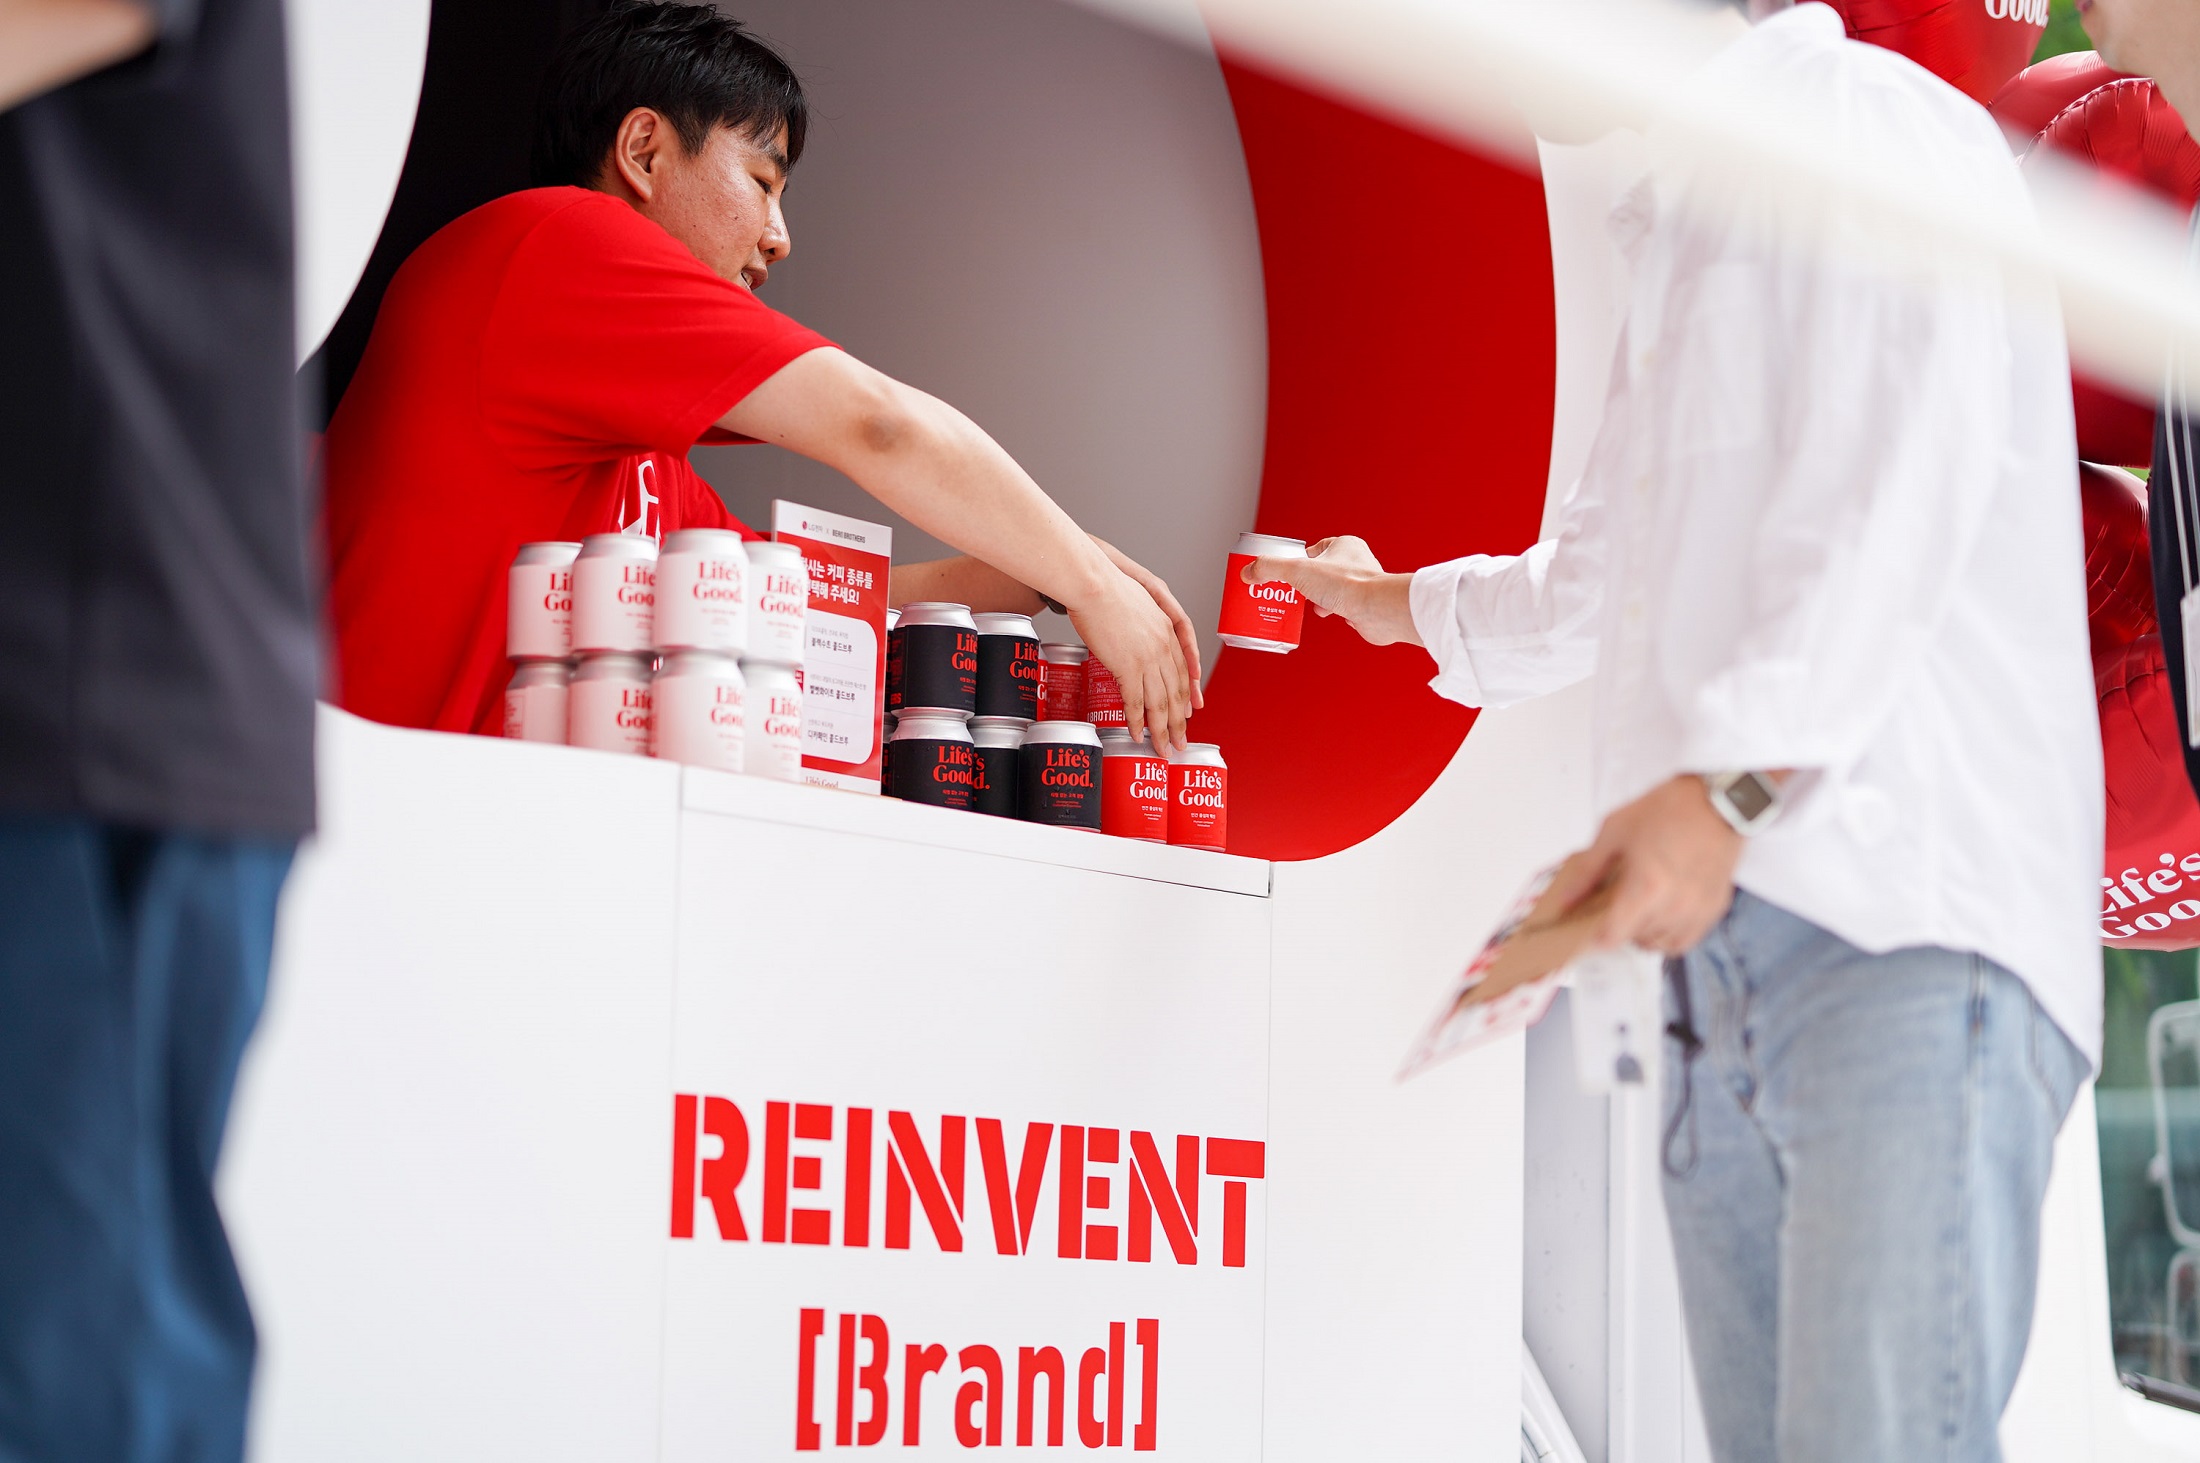 A staff handing out a coffee can to the visitor of the Life's Good event